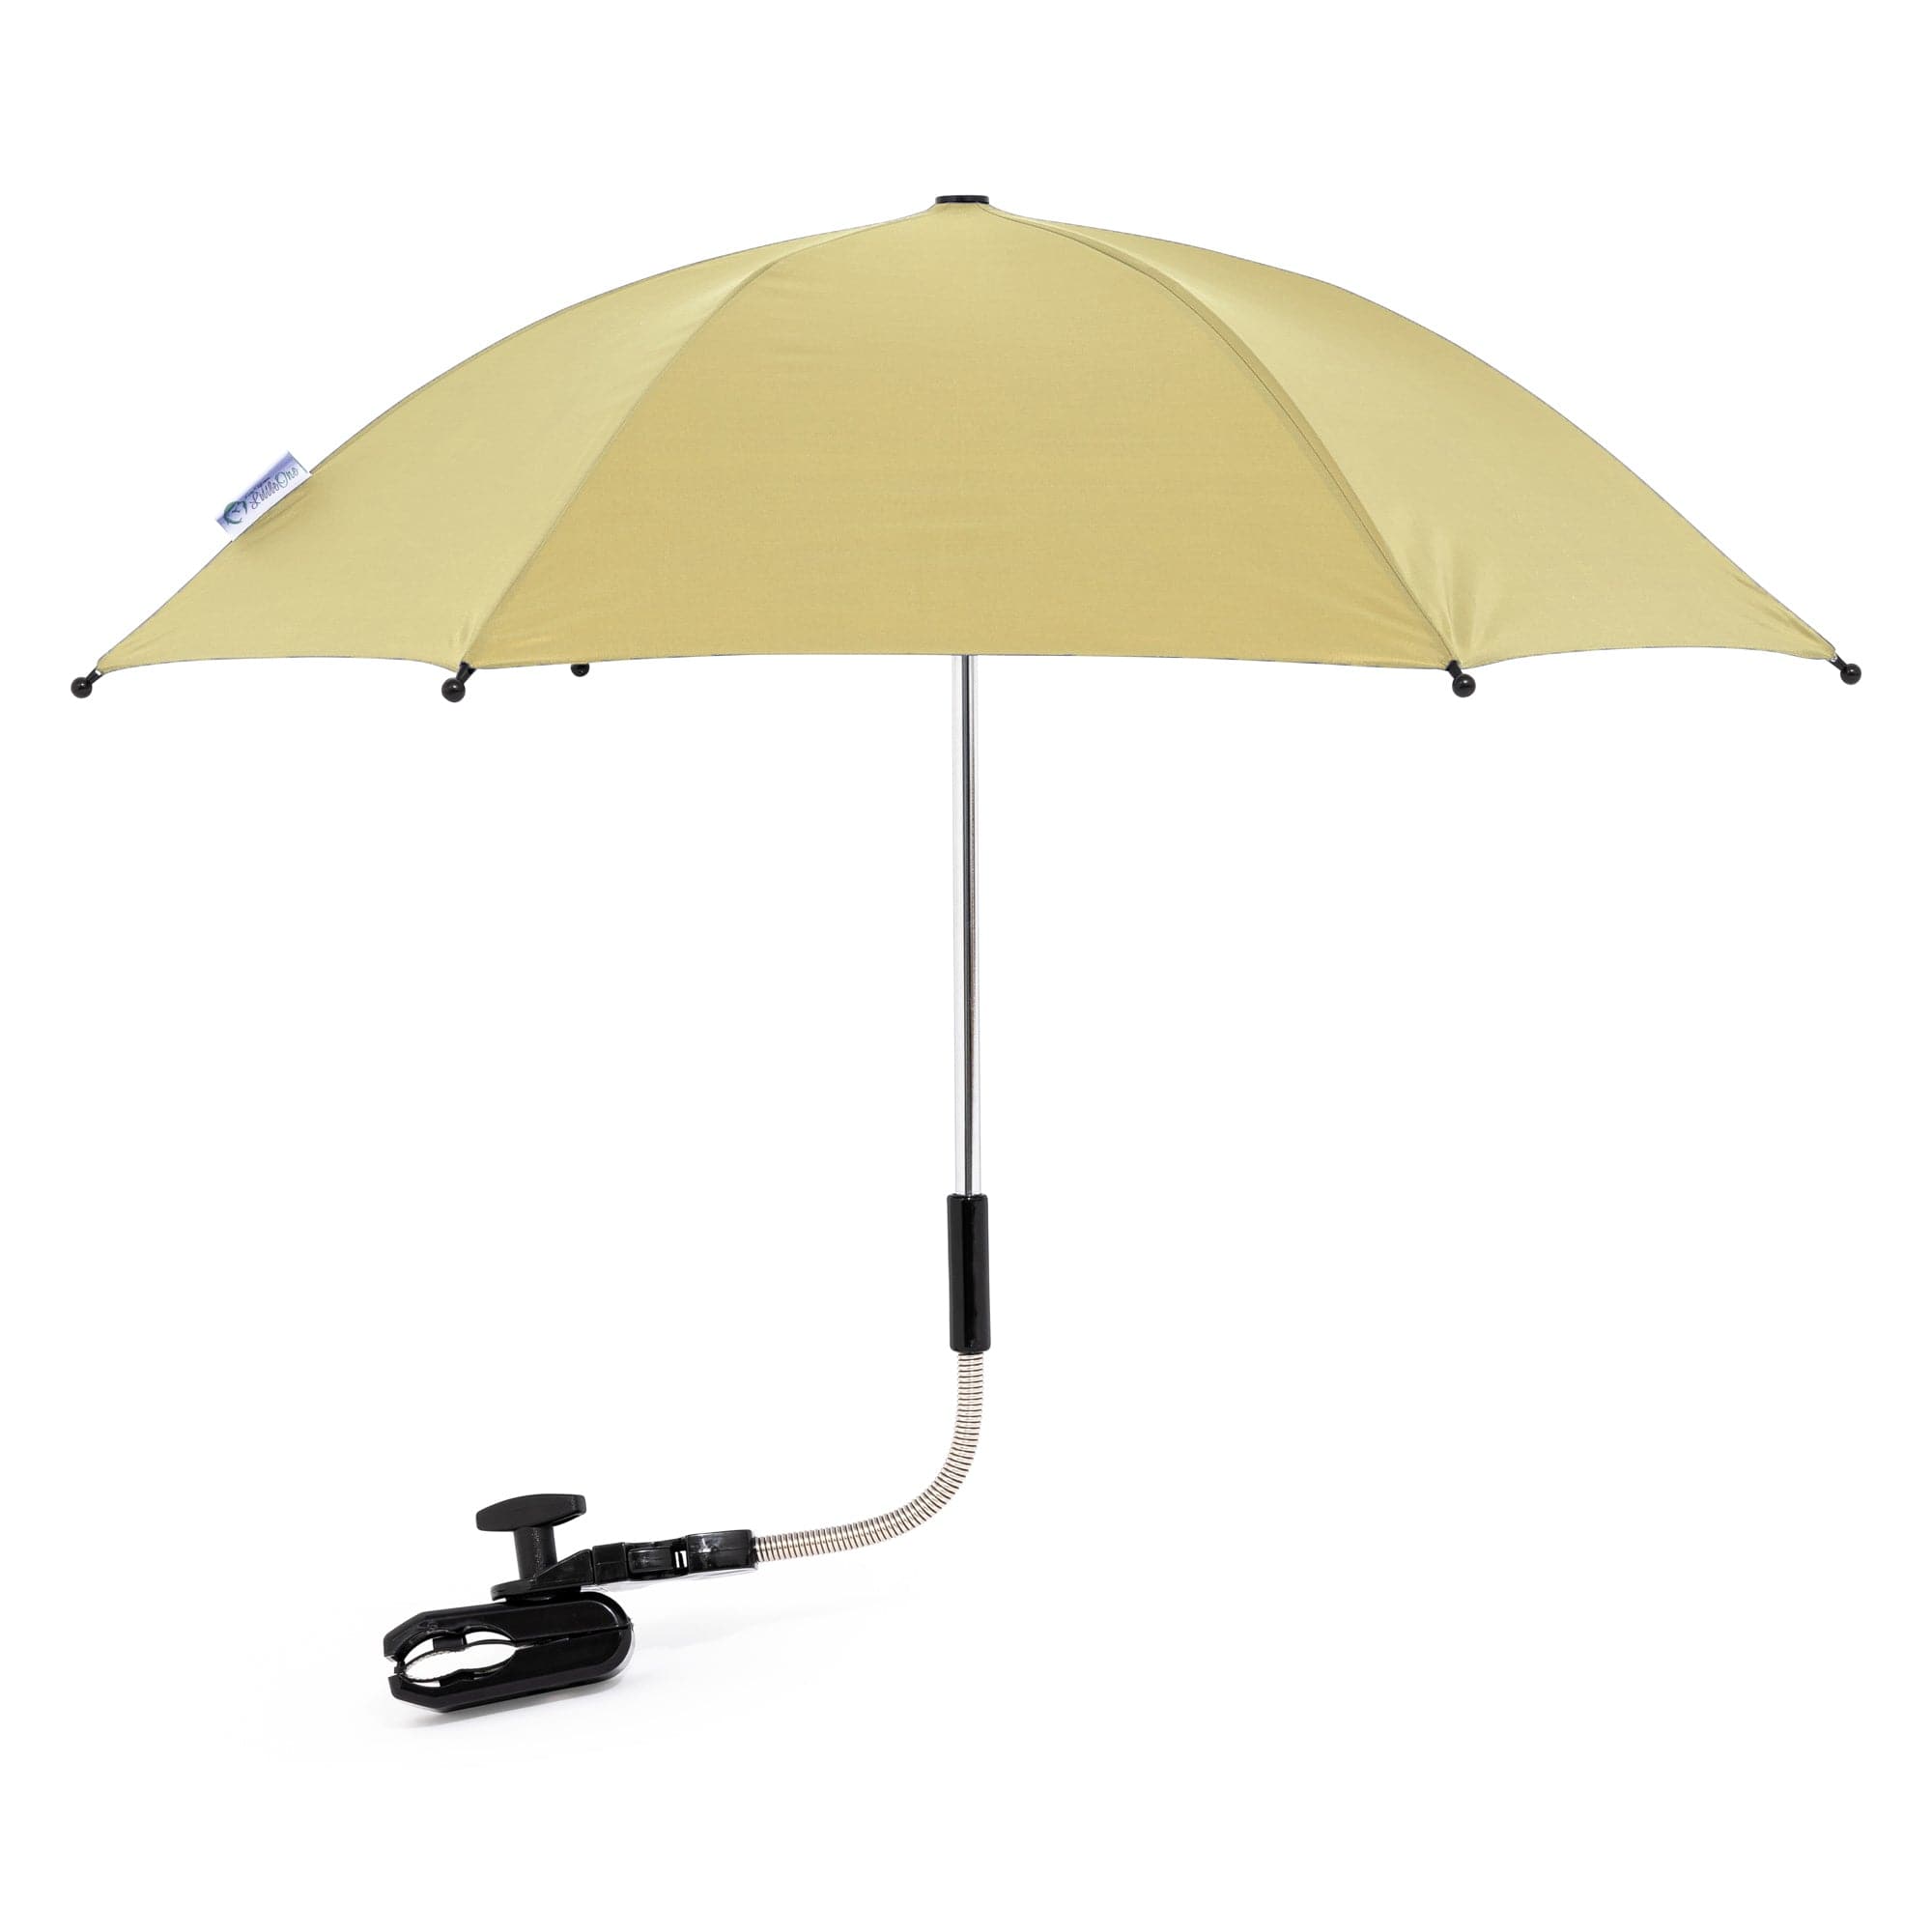 Baby Parasol Compatible With Noukies - Fits All Models - For Your Little One